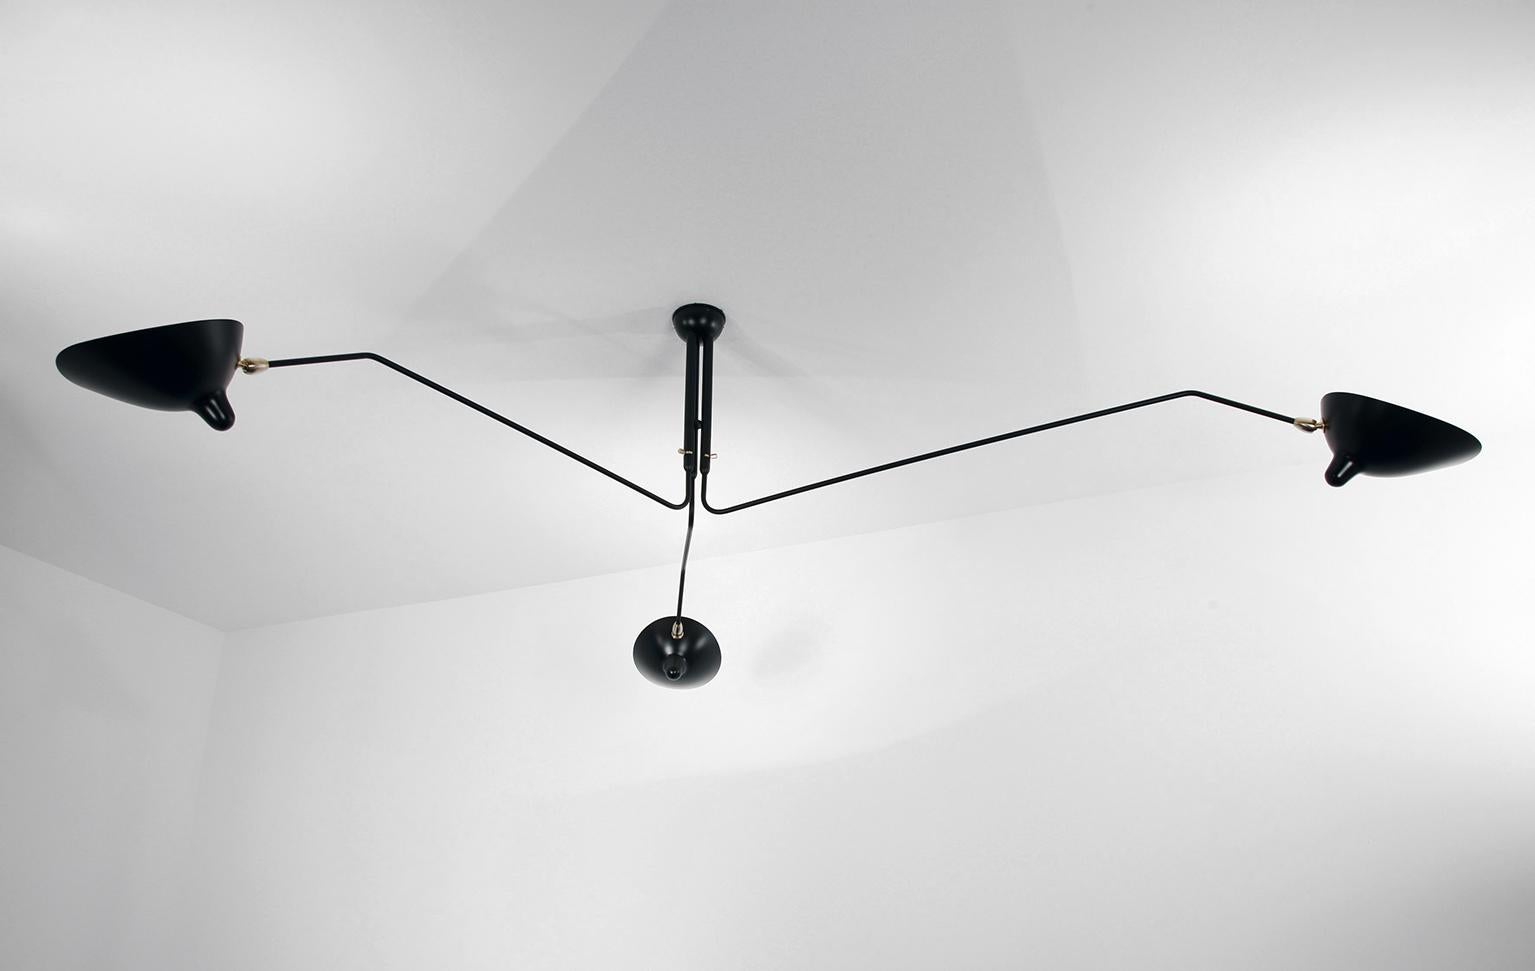 Serge Mouille Mid-Century Modern black three rotating arms ceiling lamp
Ceiling Lamp model 'Three Rotating Arms Ceiling Lamp' designed by Serge Mouille in 1958.

Manufactured by Editions Serge Mouille in France. The production of lamps, wall